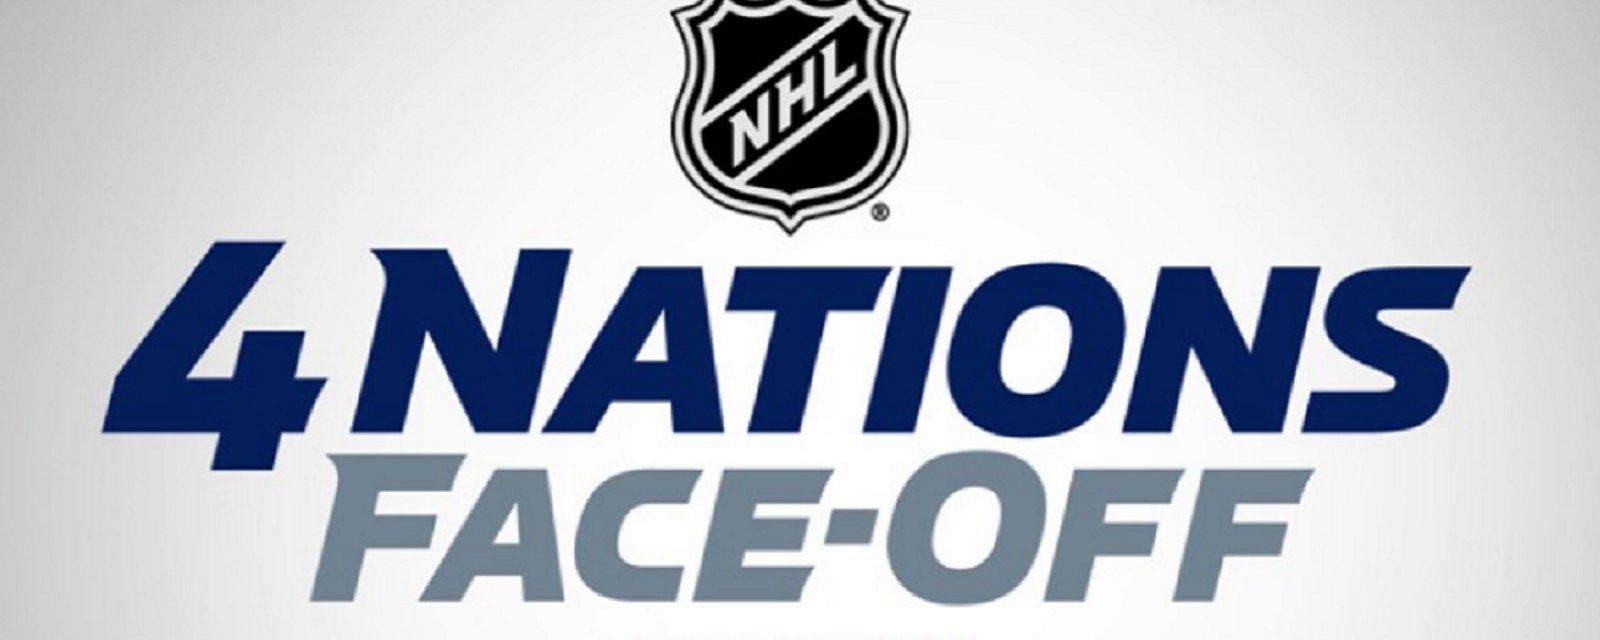 NHL unveils 4 Nations Face-off schedule on Saturday.